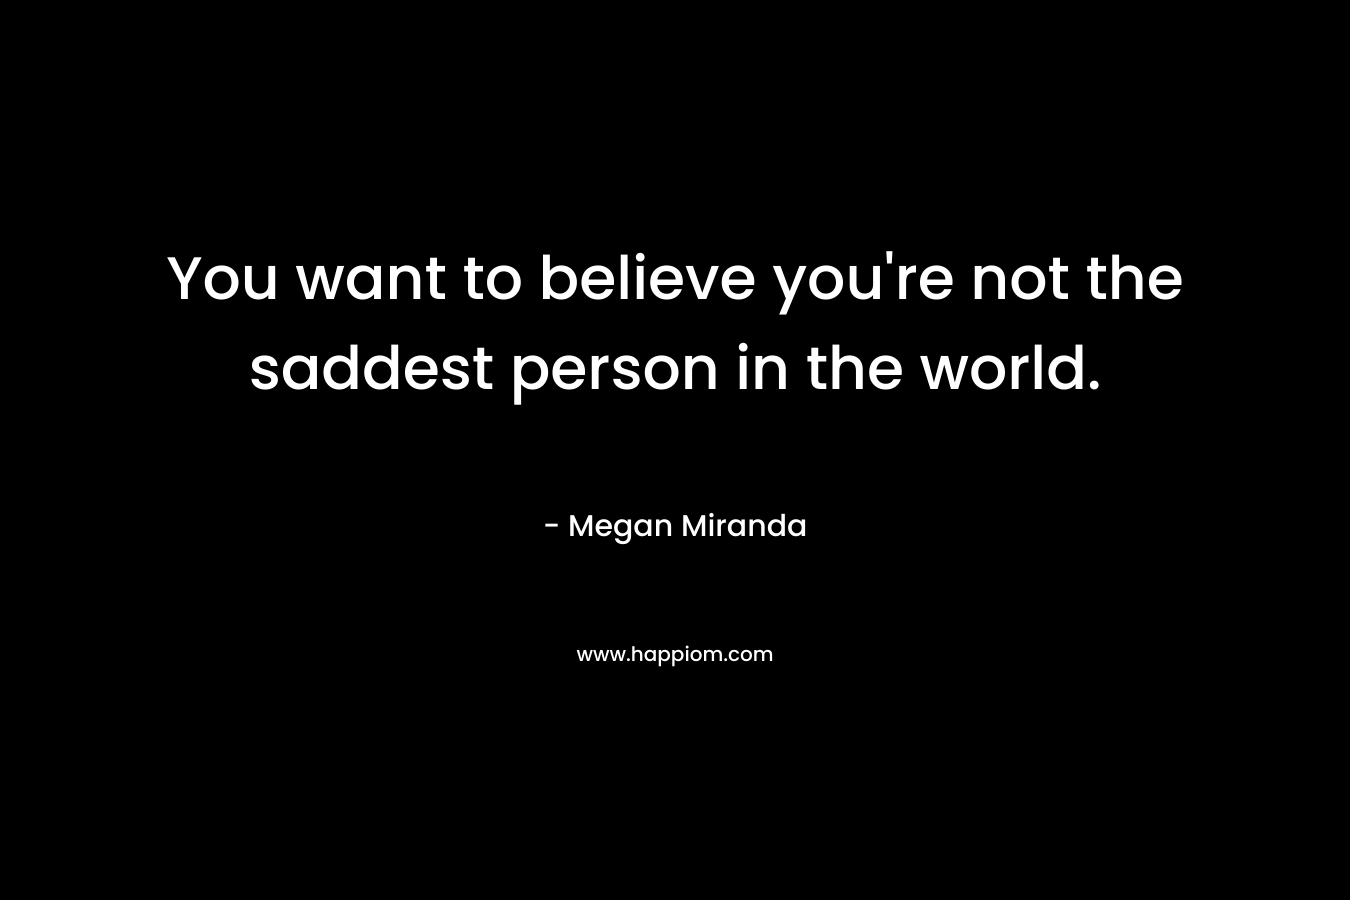 You want to believe you're not the saddest person in the world.